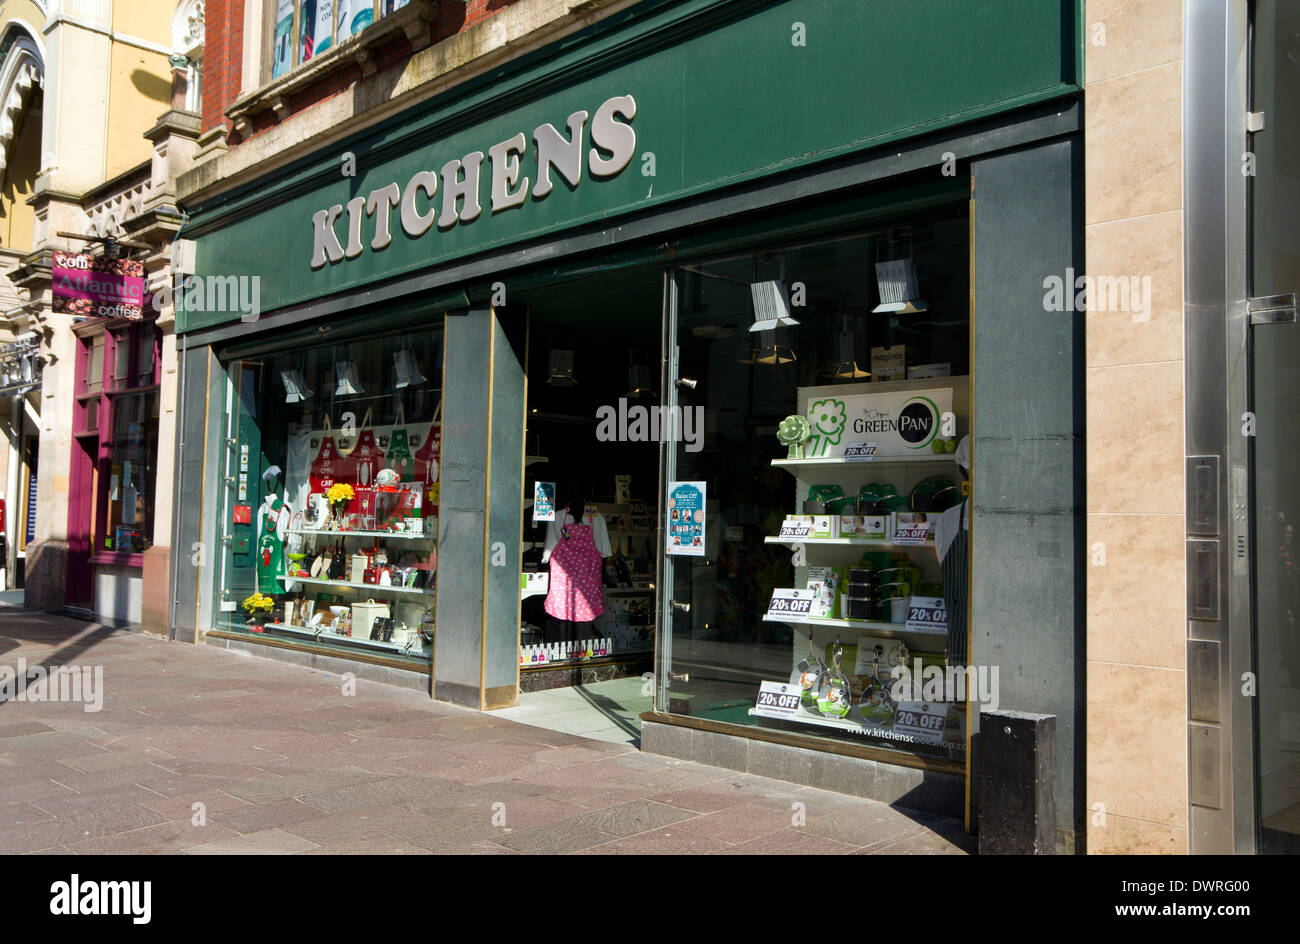 Kitchens shop, High Street, Cardiff, Wales. Stock Photo